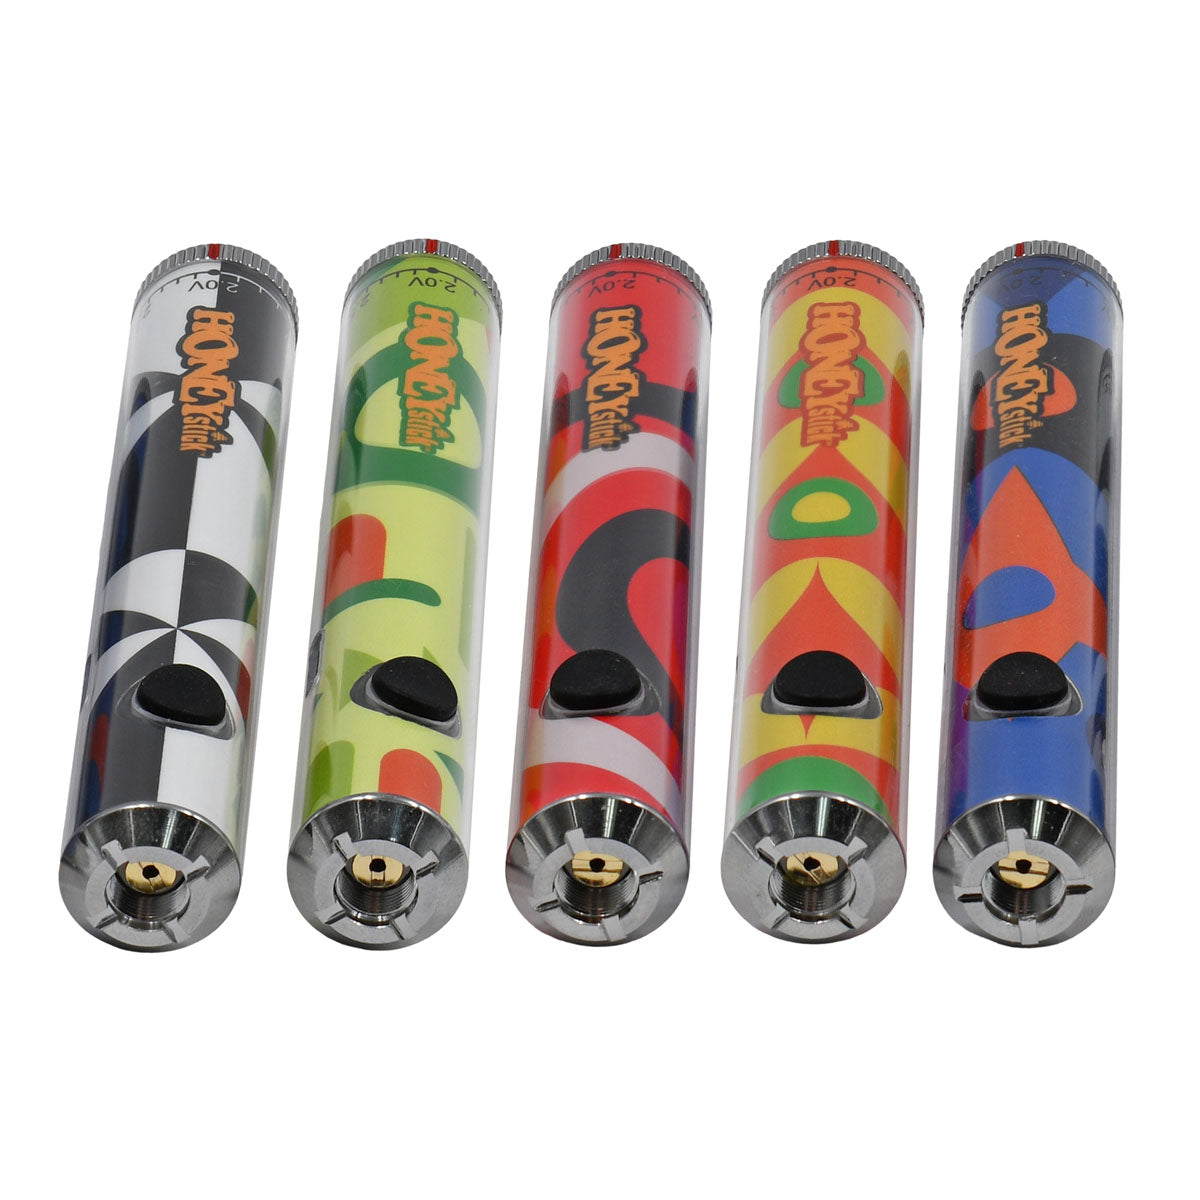 5 colors Honeystick 510 Twist Vape Pen Battery, with Variable Voltage and  650mAh Capacity 